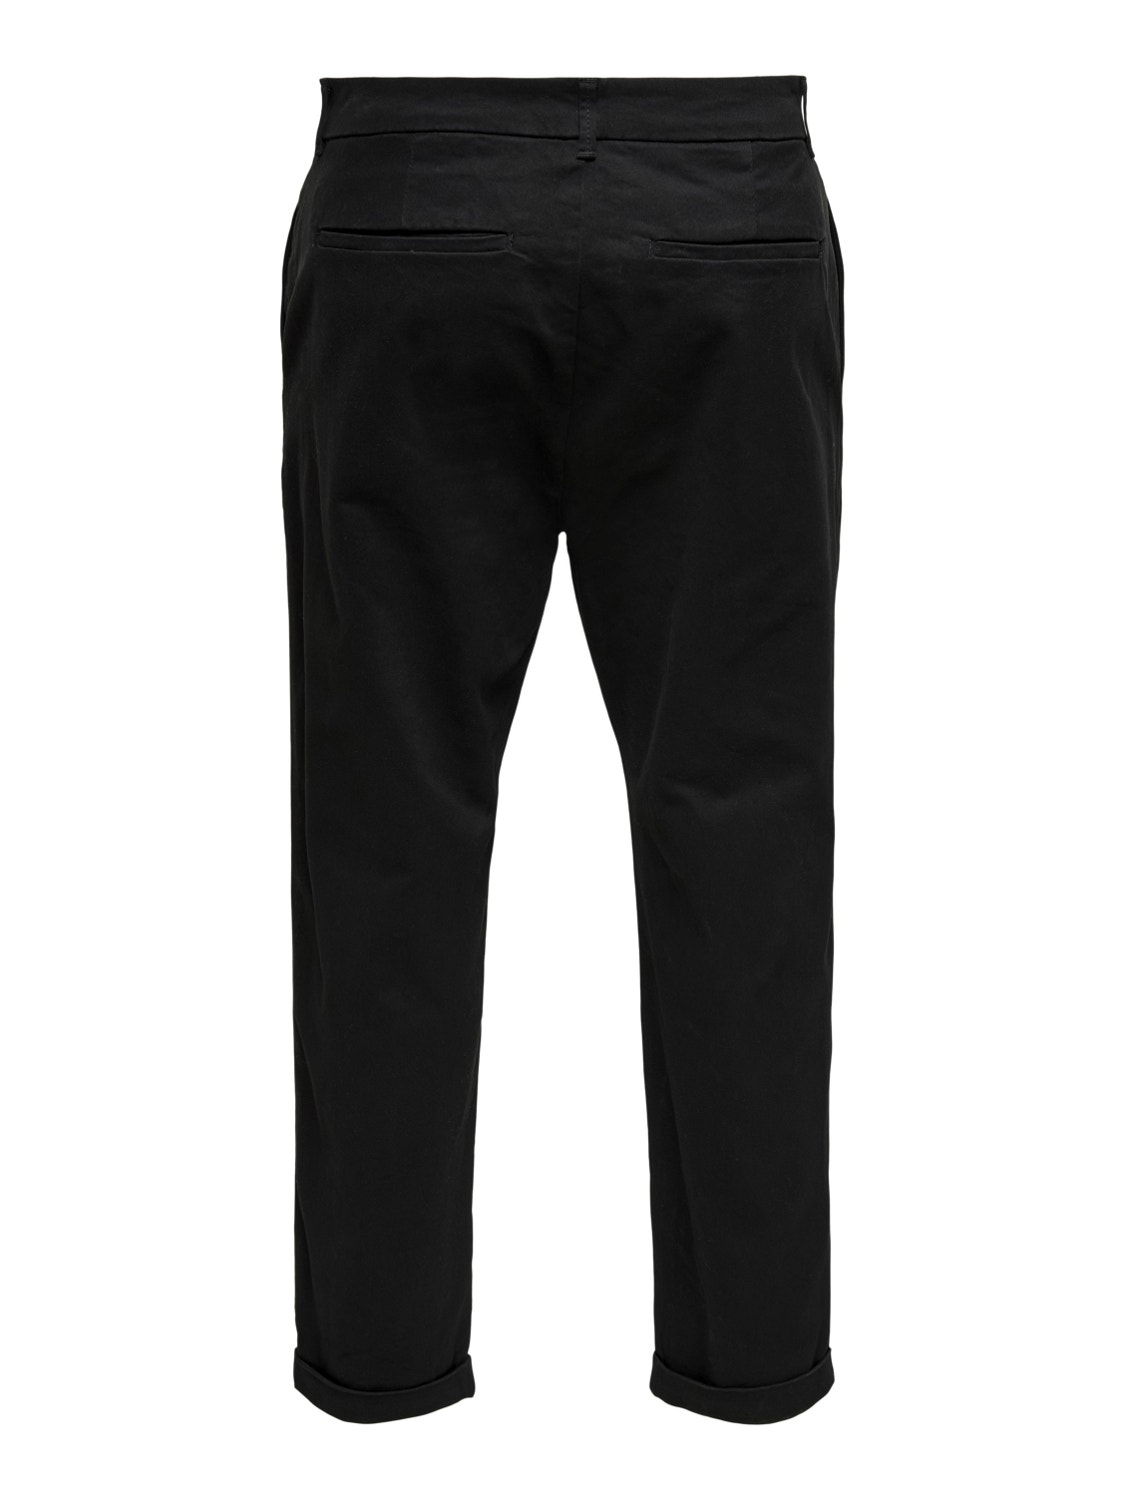 ONLY & SONS ONSKENT CROPPED CHINO MA 0400 -Black - 22020400